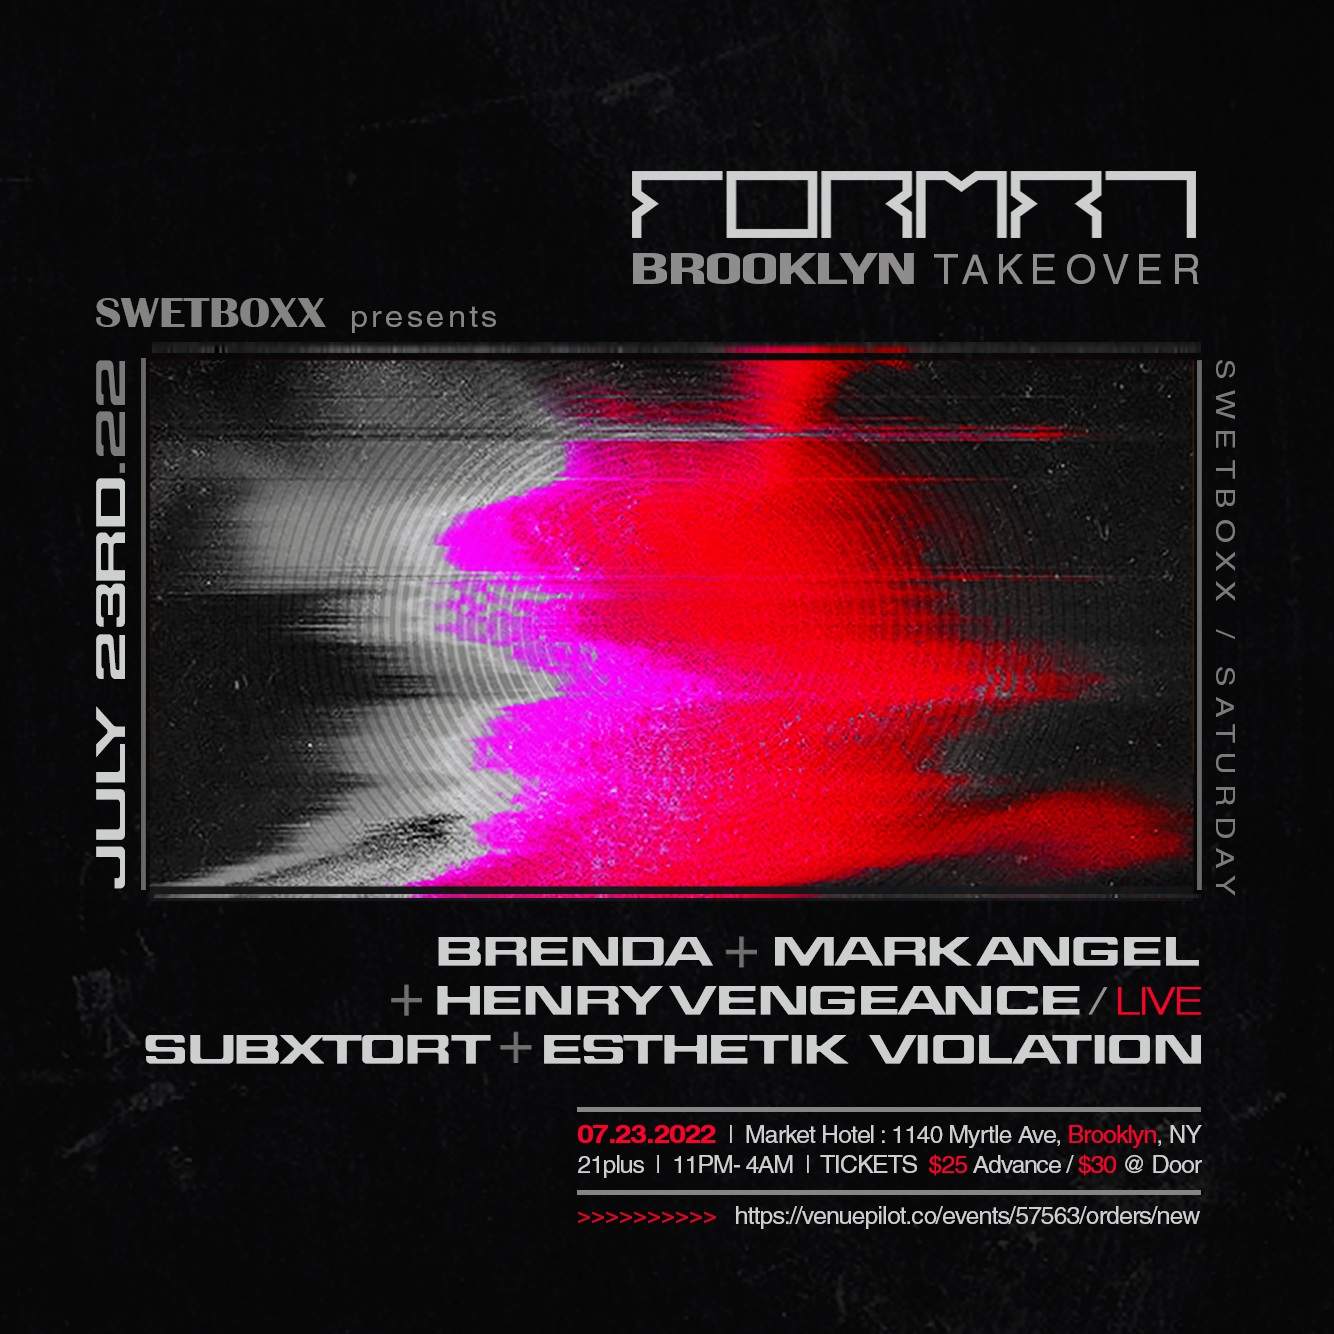 SWETBOXX PRESENTS: FORMAT BROOKLYN TAKEOVER - フライヤー表